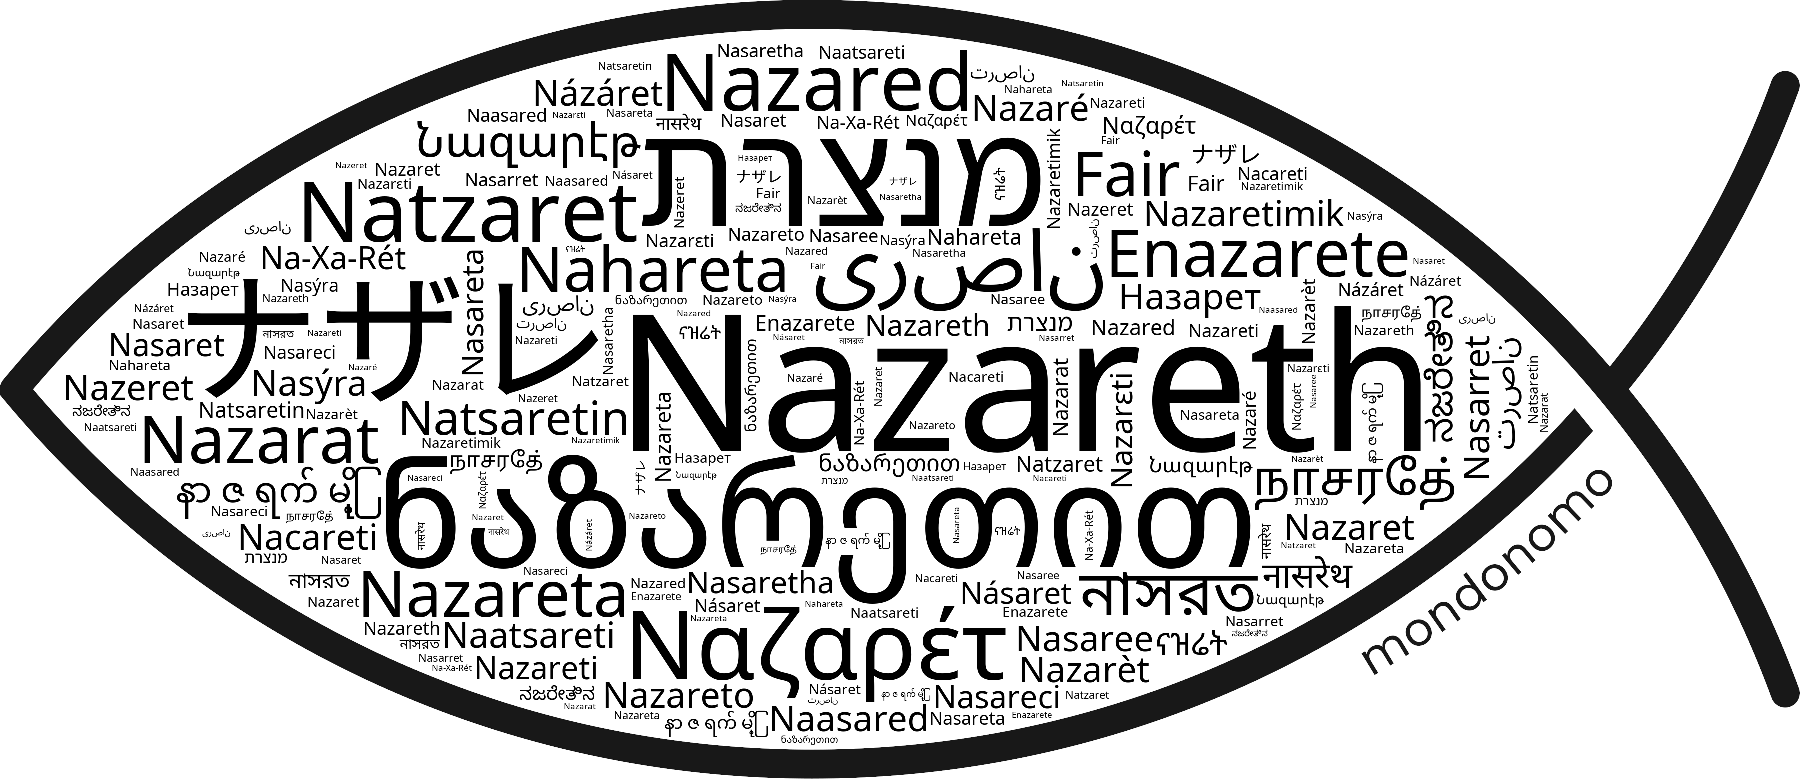 Name Nazareth in the world's Bibles